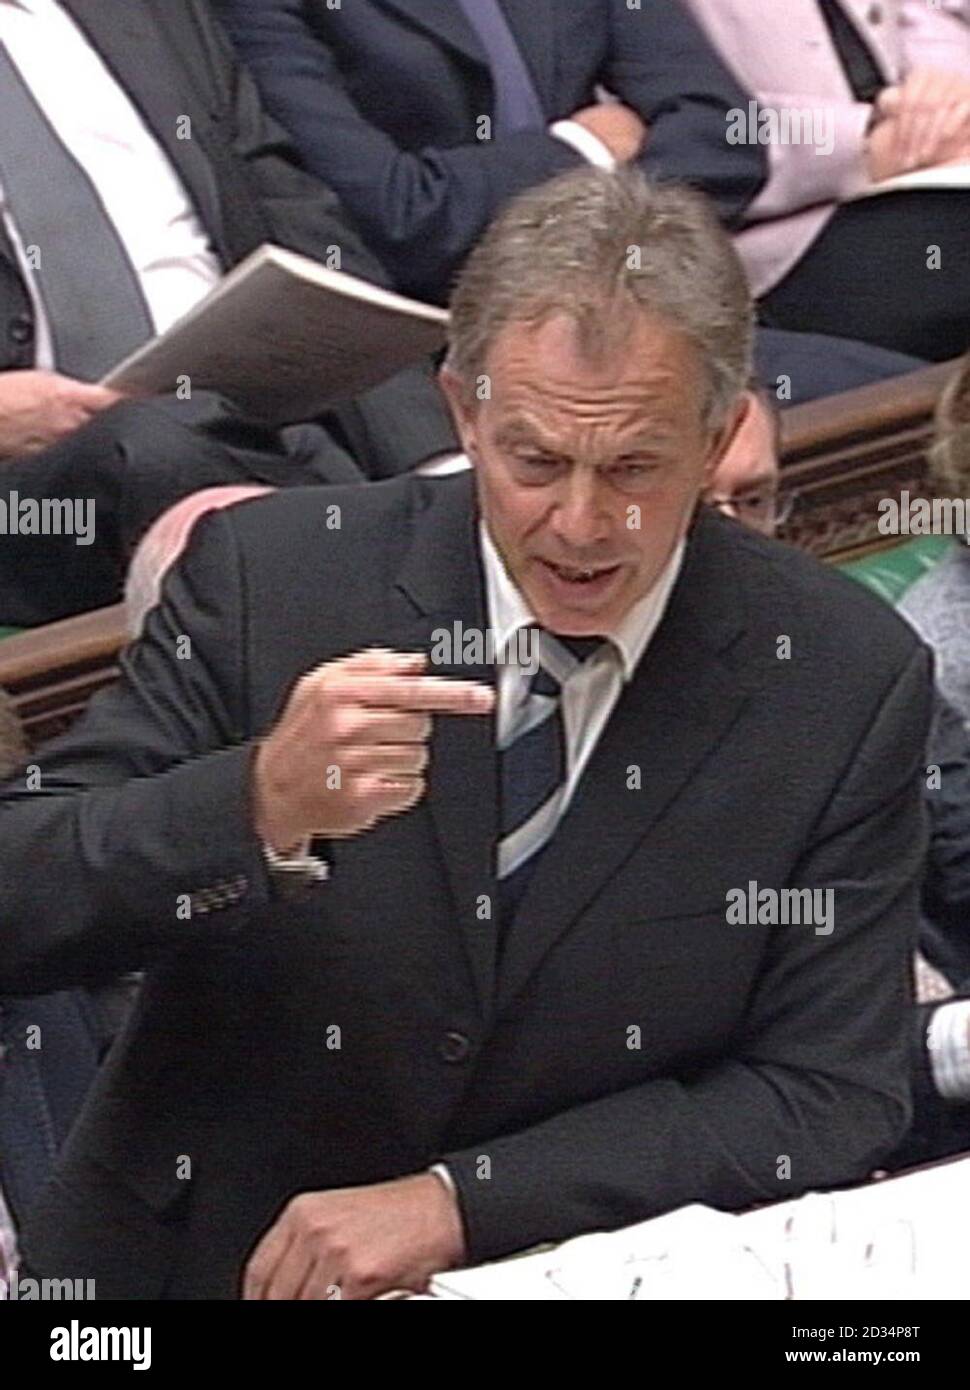 Prime Minister Tony Blair speaks during Prime Minister's Questions at the House of Commons, London. Stock Photo